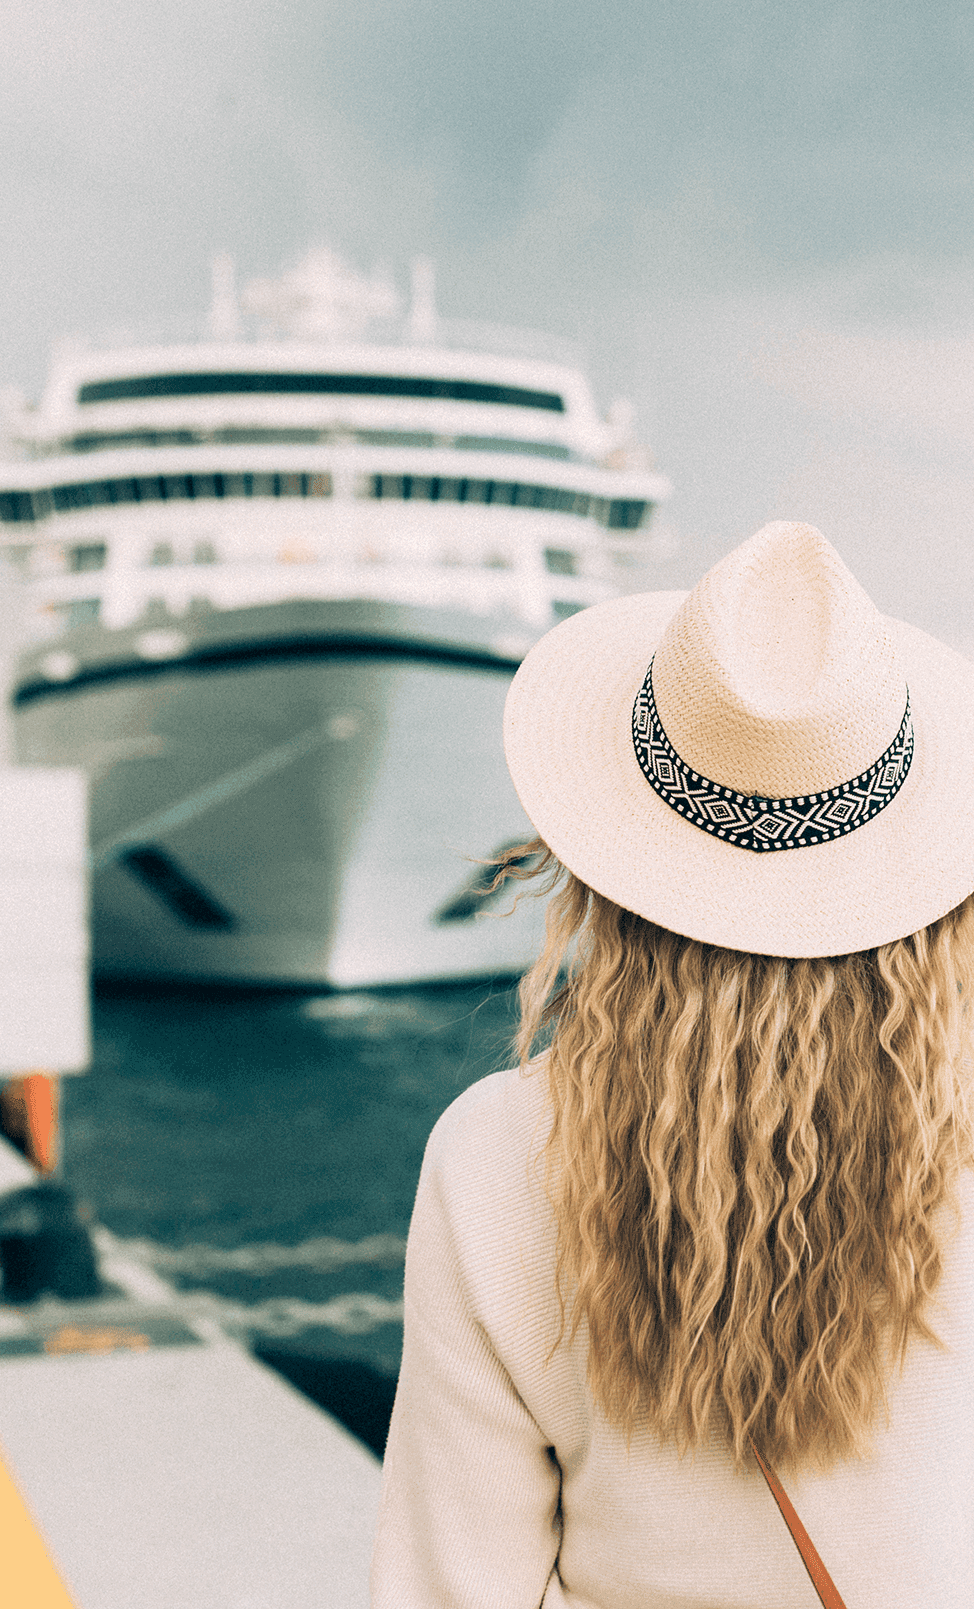 Girl standing in front of cruise ship